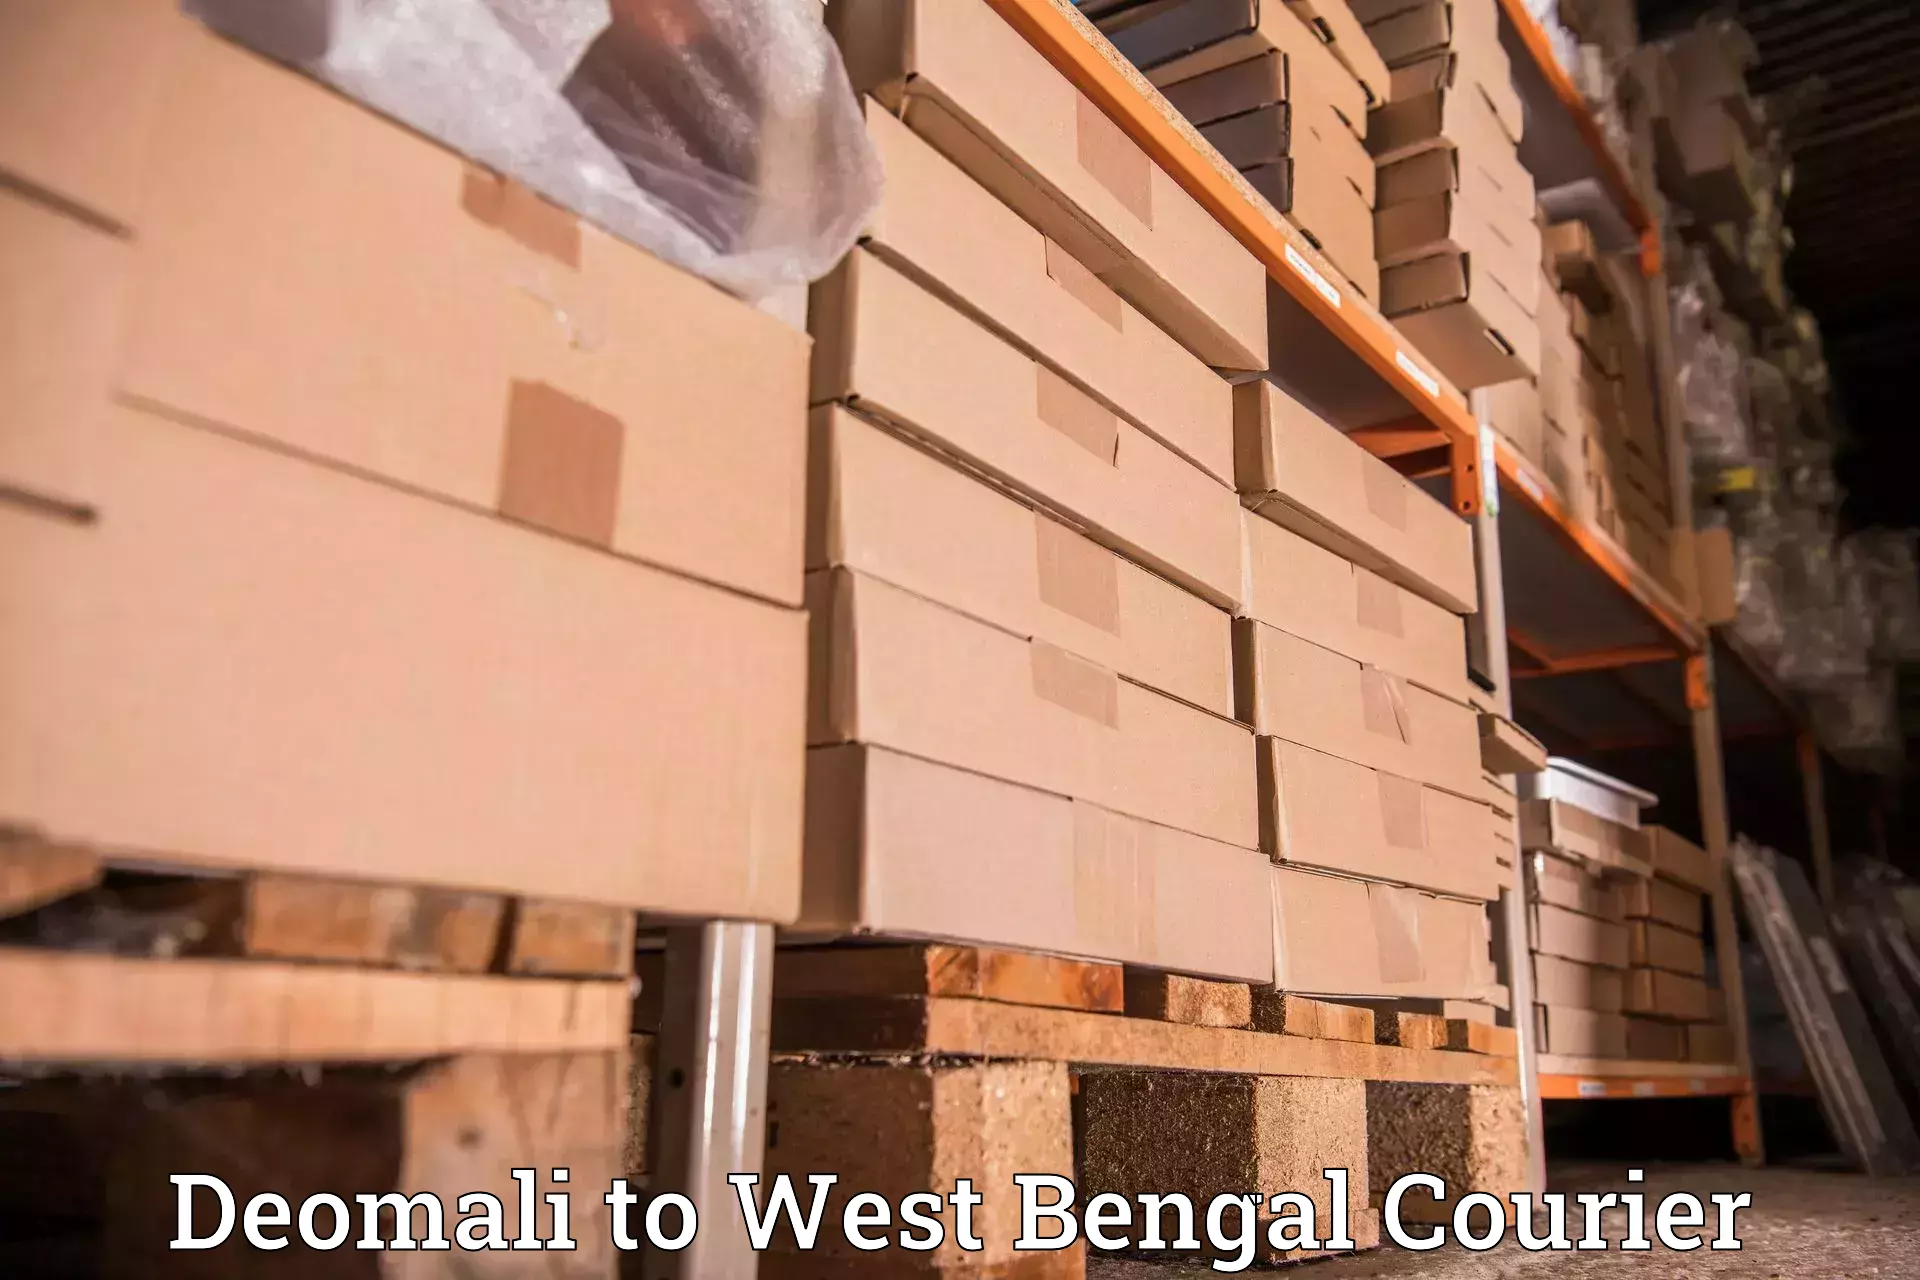 Global courier networks Deomali to Rampurhat